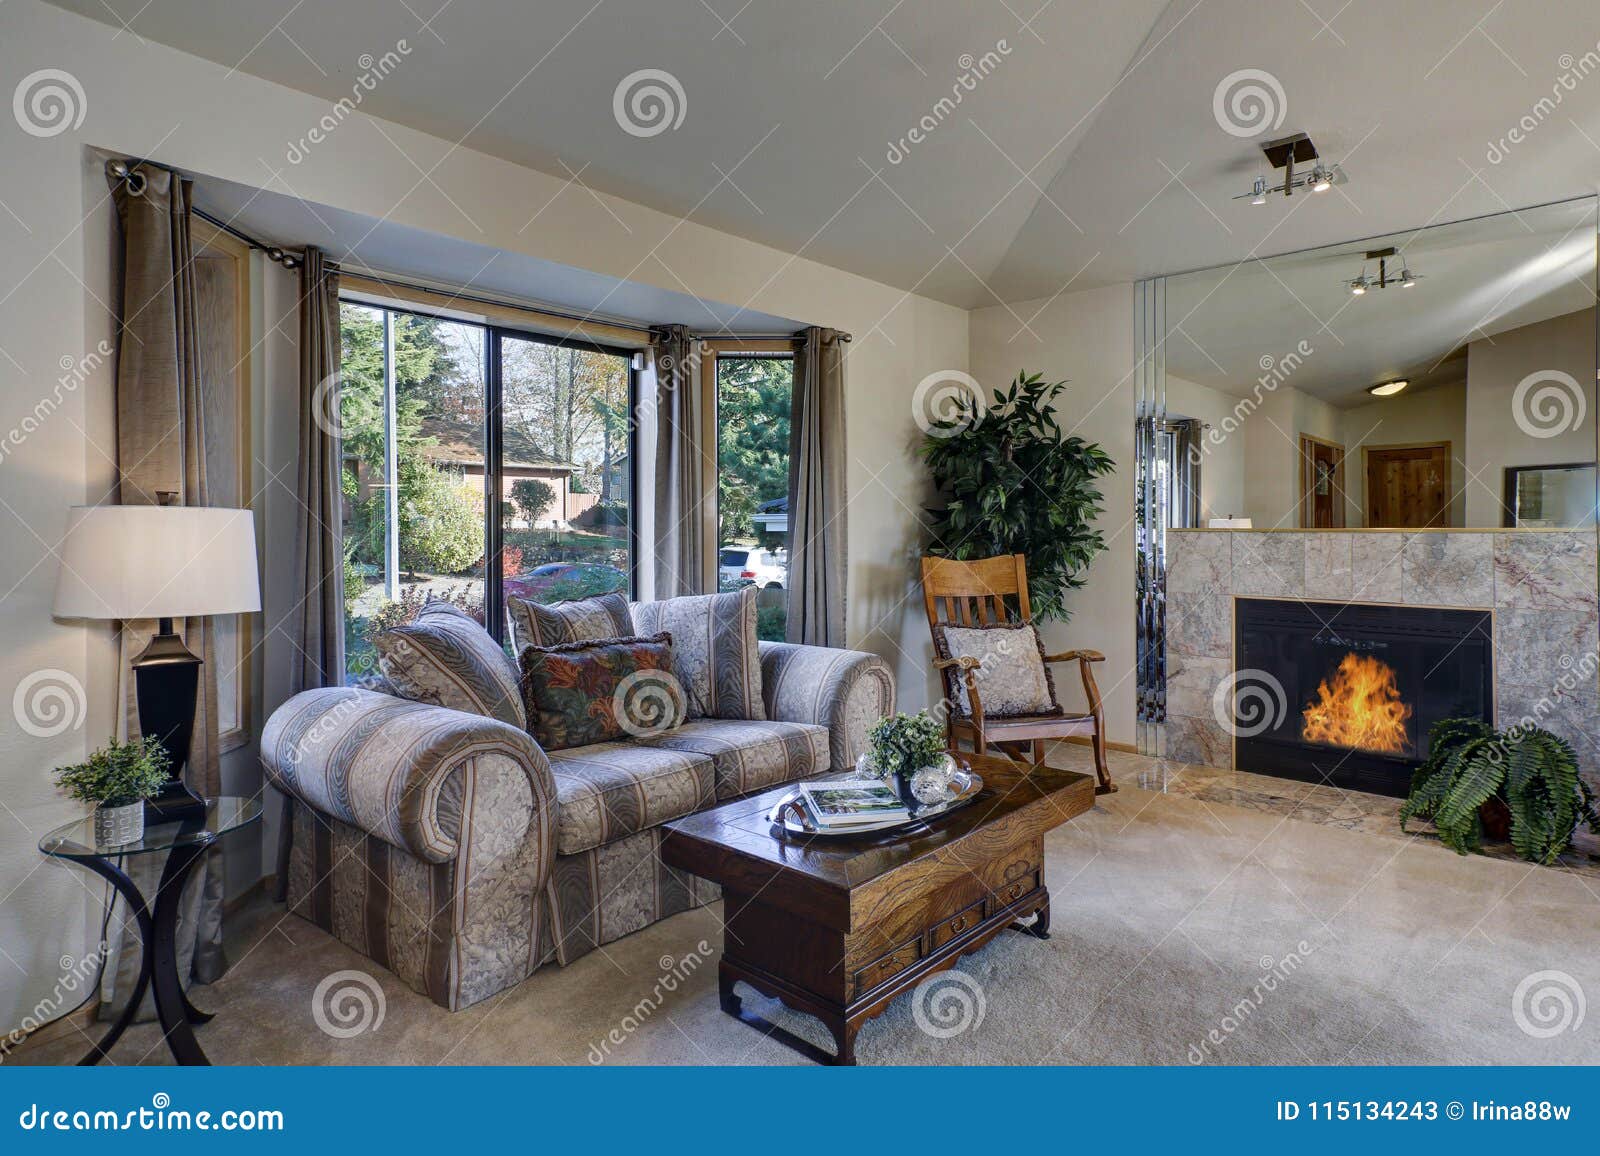 Light Filled Family Room With Vaulted Ceiling Stock Image Image